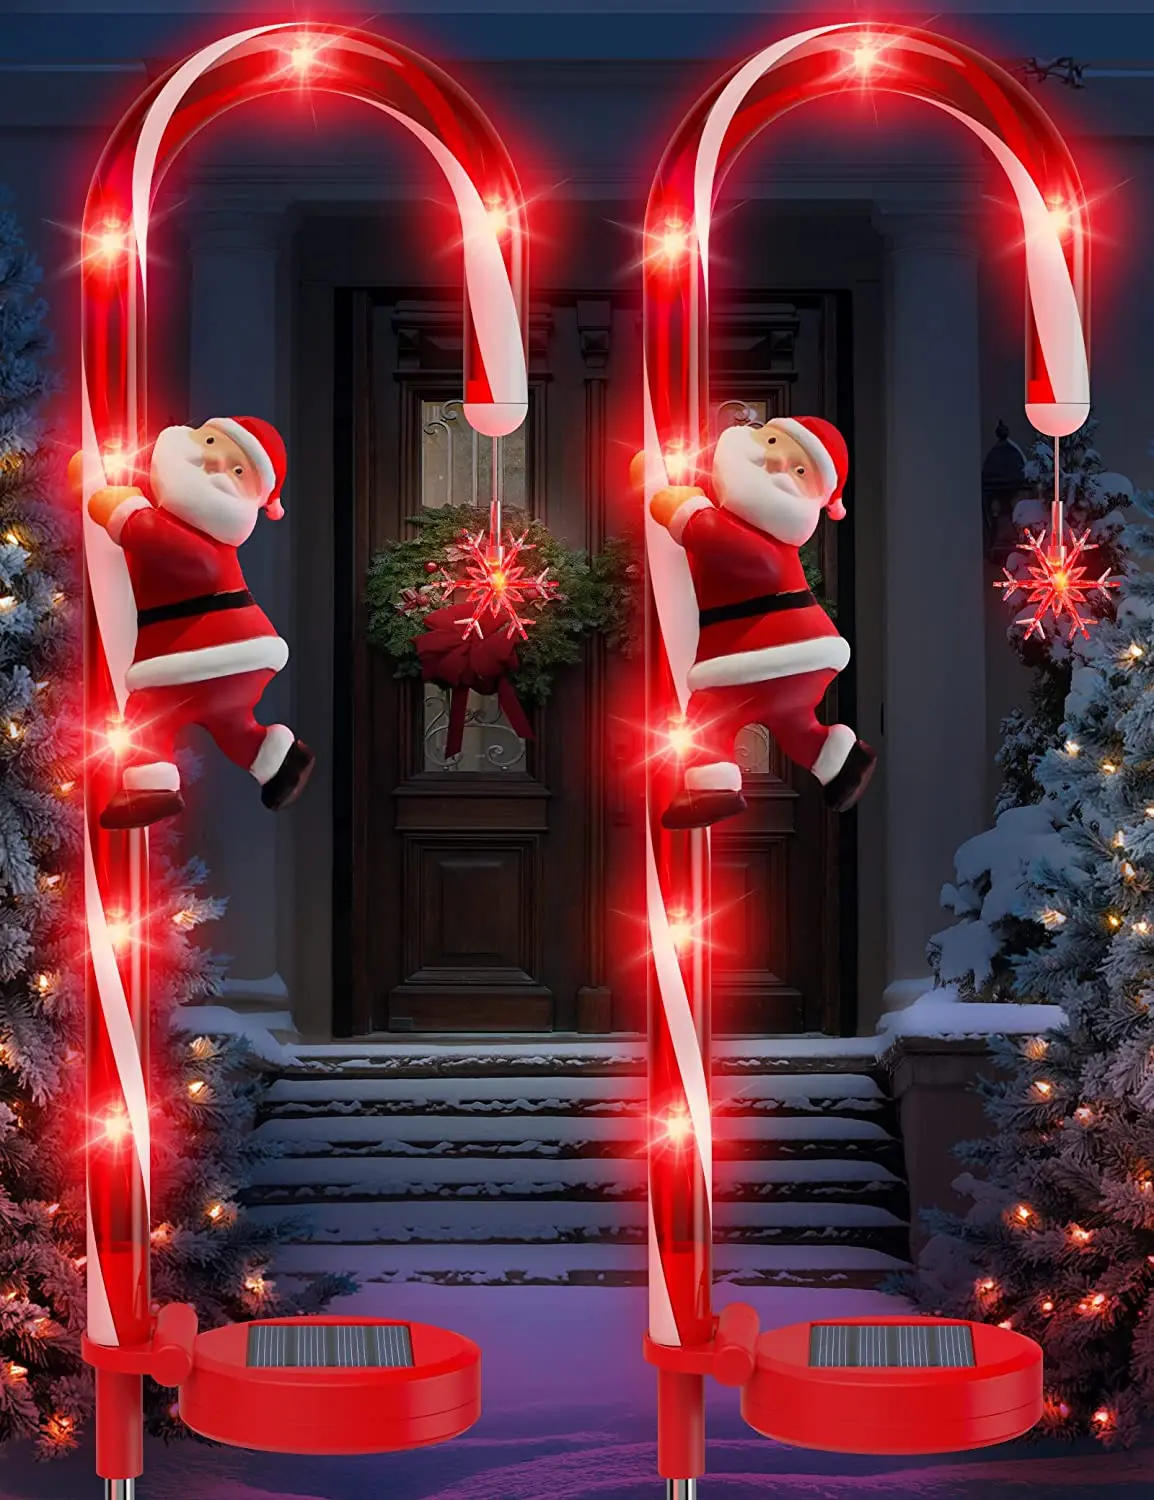 Christmas LED Solar Christmas Decoration Candy Cane Sign Lights Outdoor Stake Lights For Road Garden Lawn Lights Christmas Gifts it s love neon sign led wedding scene romantic valentine s day proposal couple room living room apartment outdoor mood lights